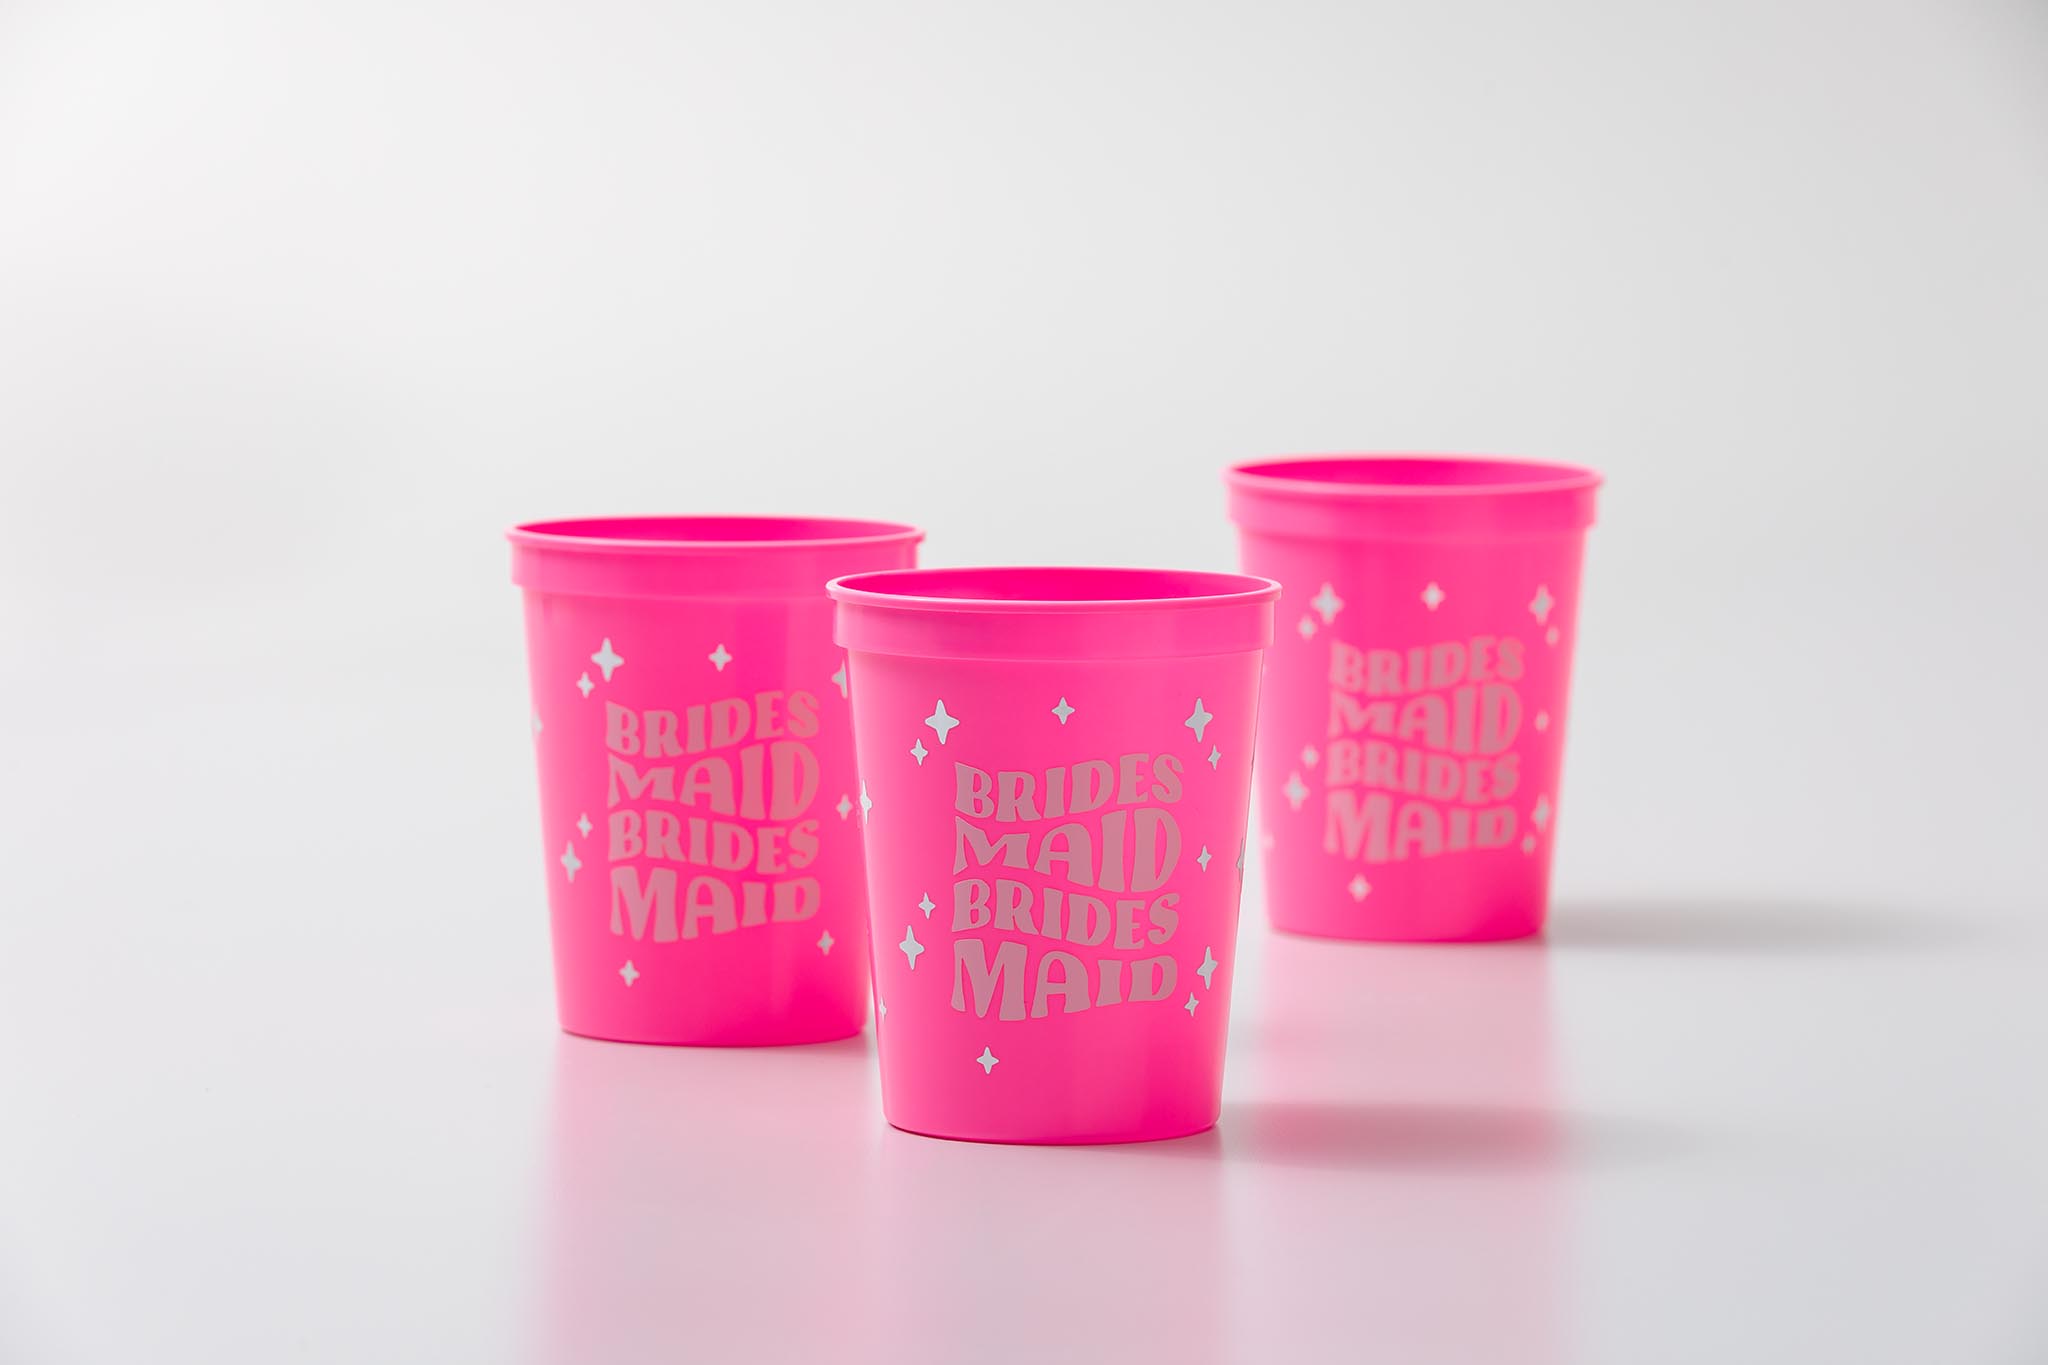 Groovy bridesmaid drink cups for bachelorette party